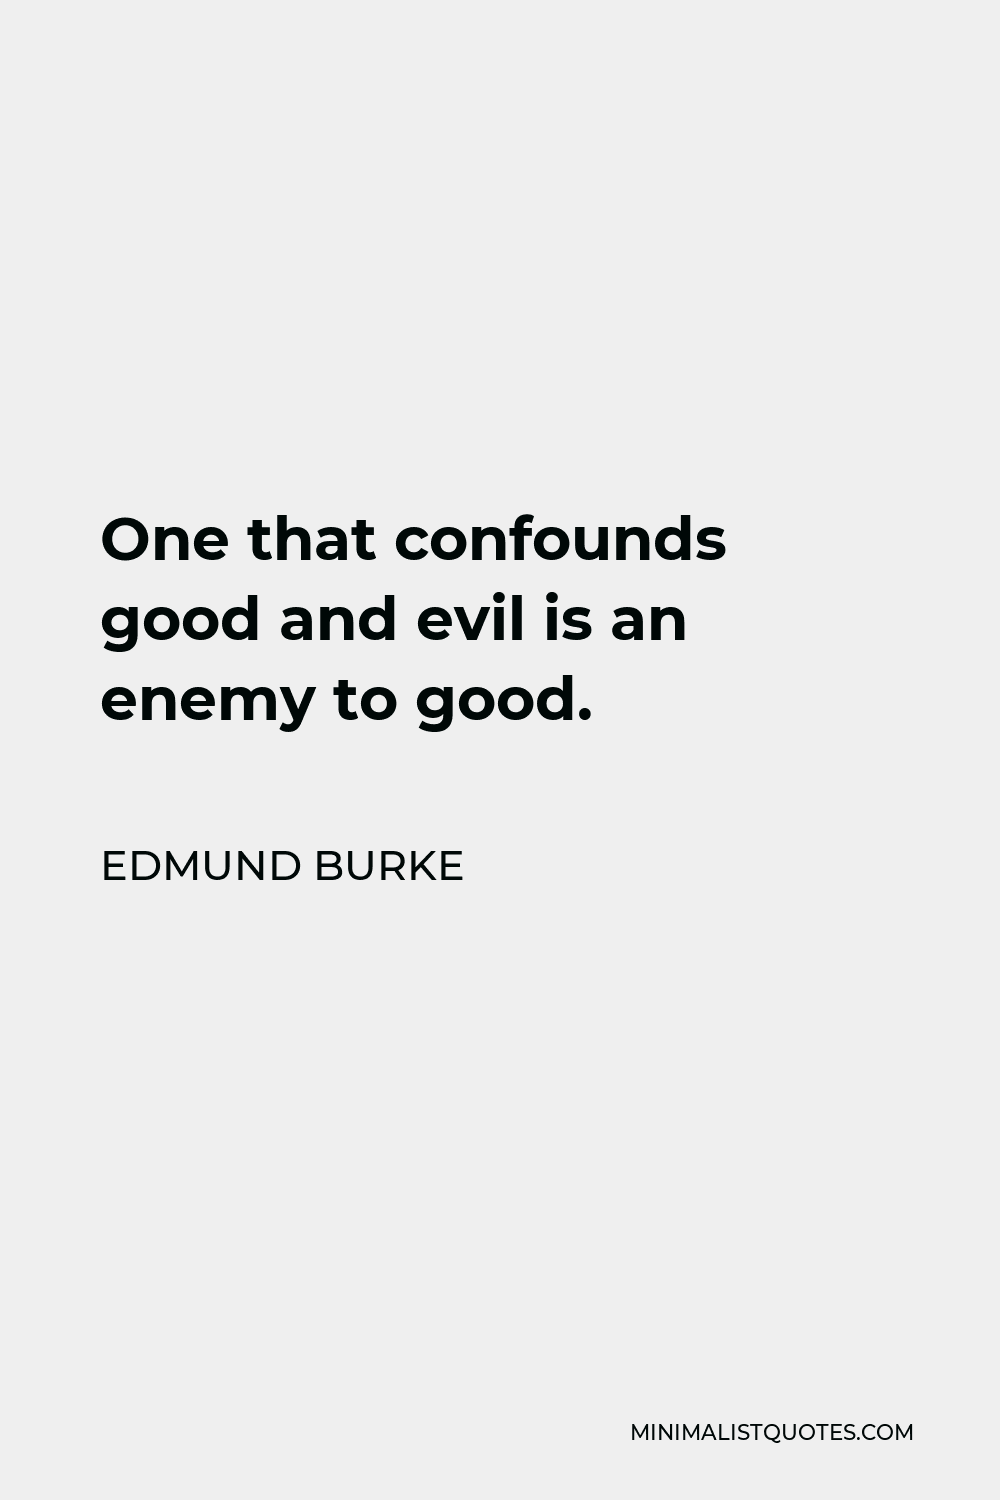 Edmund Burke Quote - One that confounds good and evil is an enemy to good.